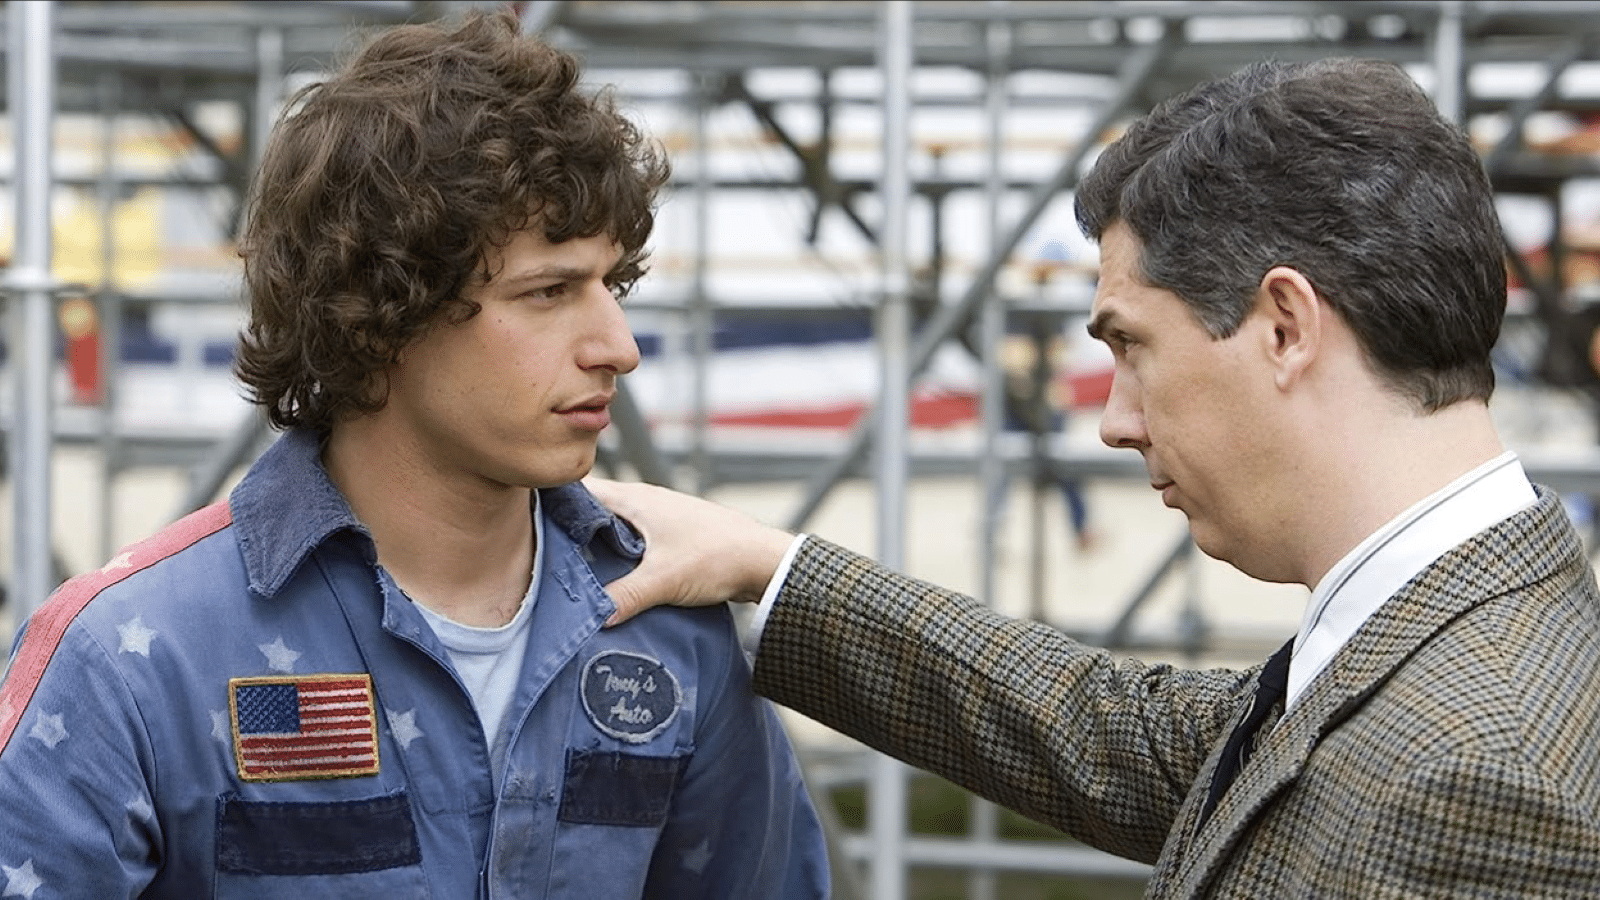 <p><em>Hot Rod</em> is a painfully underrated film that perfectly fits into this absurd comedy genre. Andy Samberg is, as always, a comic genius that seems to make simple jokes wildly hilarious. He plays an immature and competitive manchild who wants to save his stepfather from a terminal illness just so they can fight.</p>